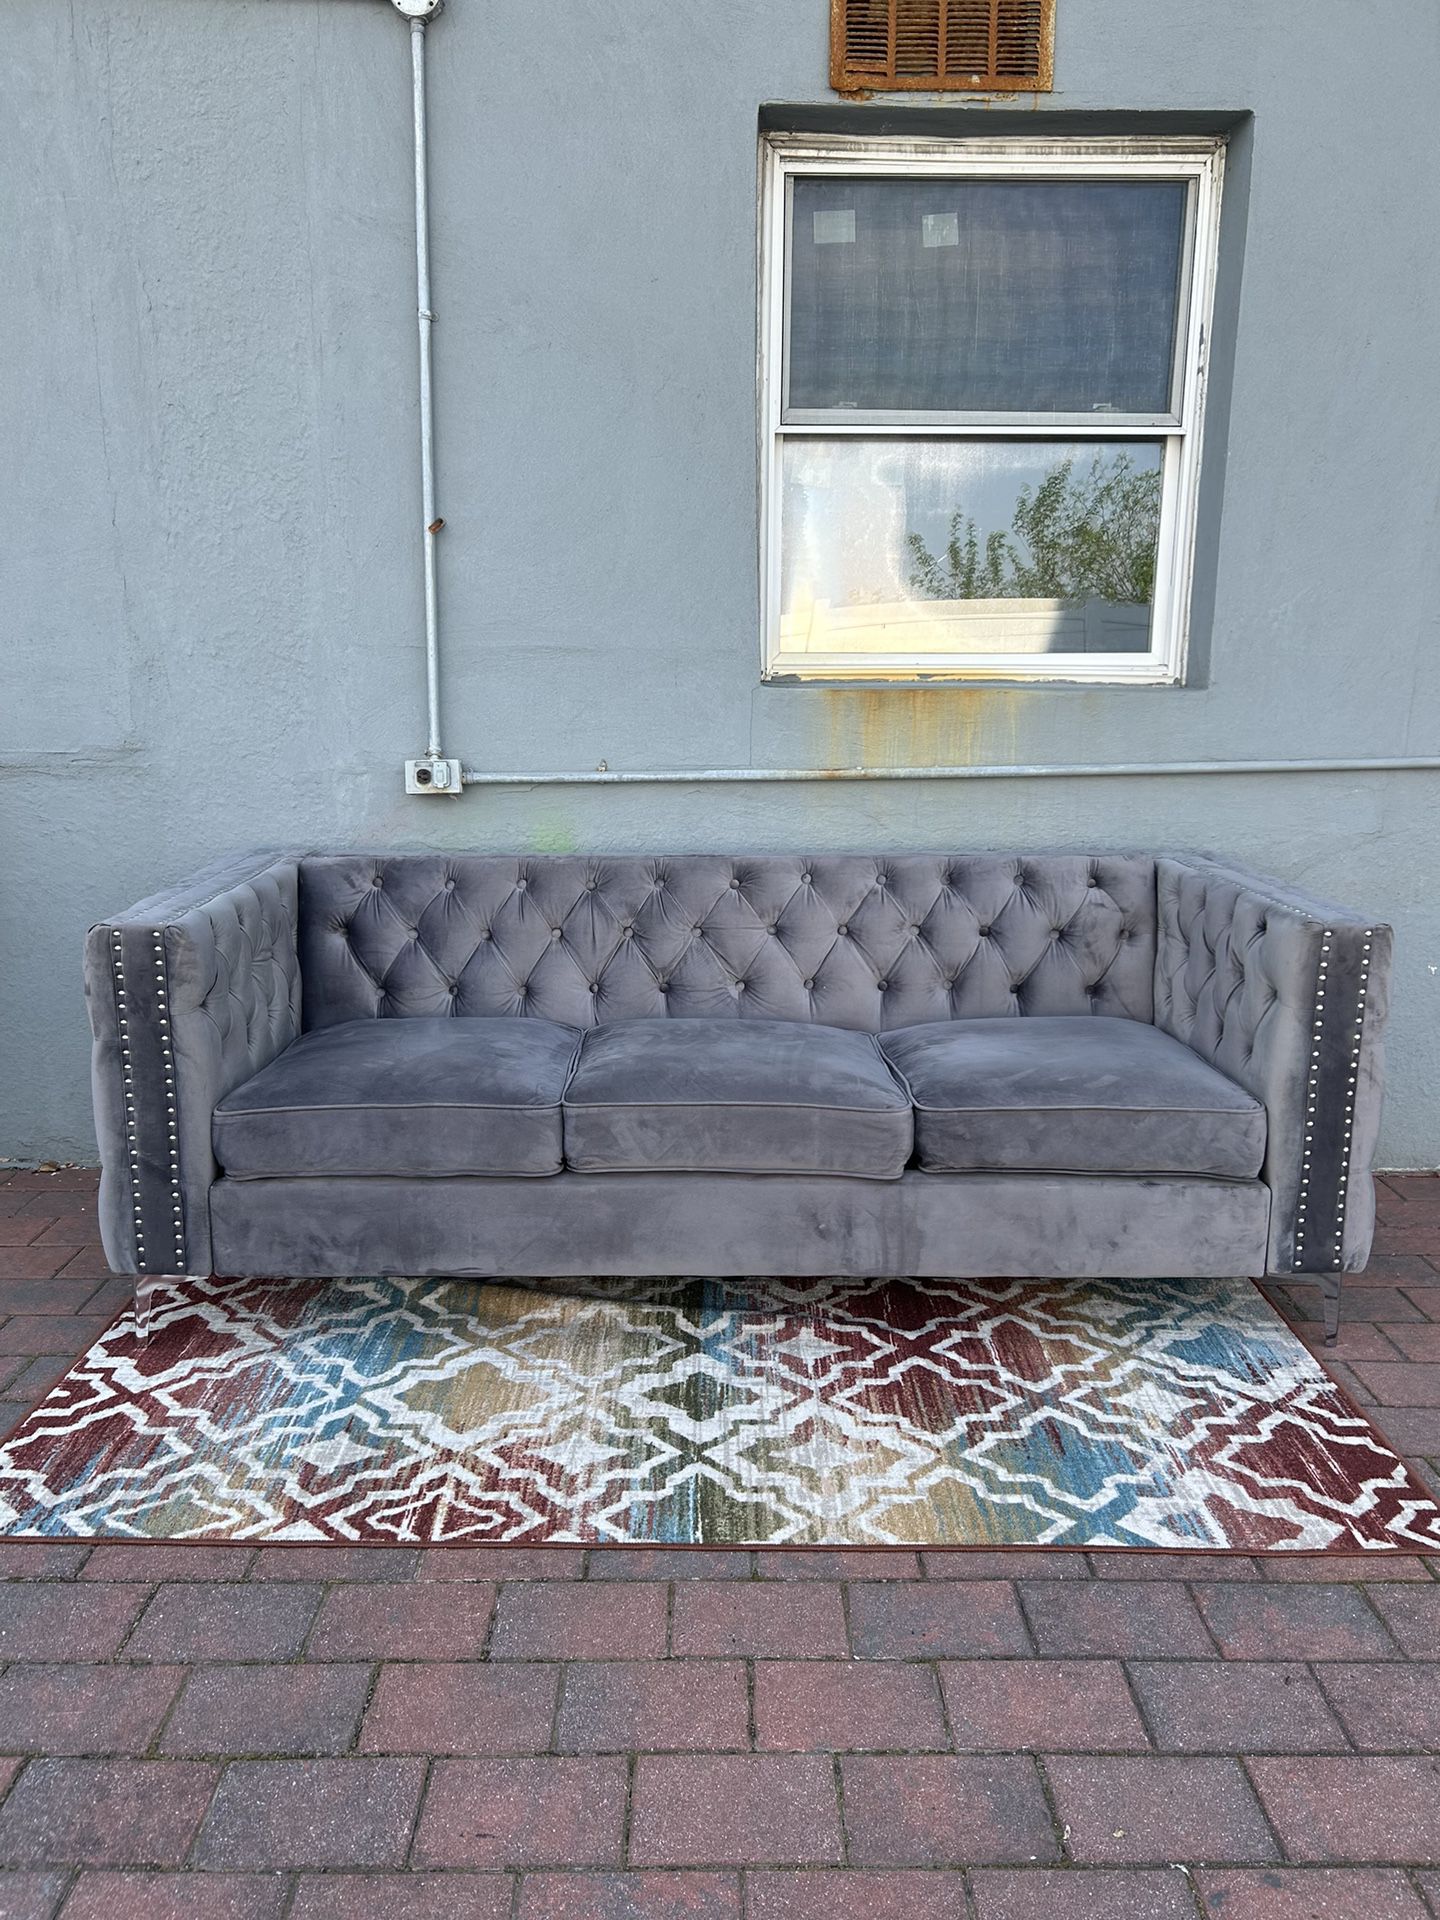 Sofa/Couch FREE CURBSIDE DELIVERY